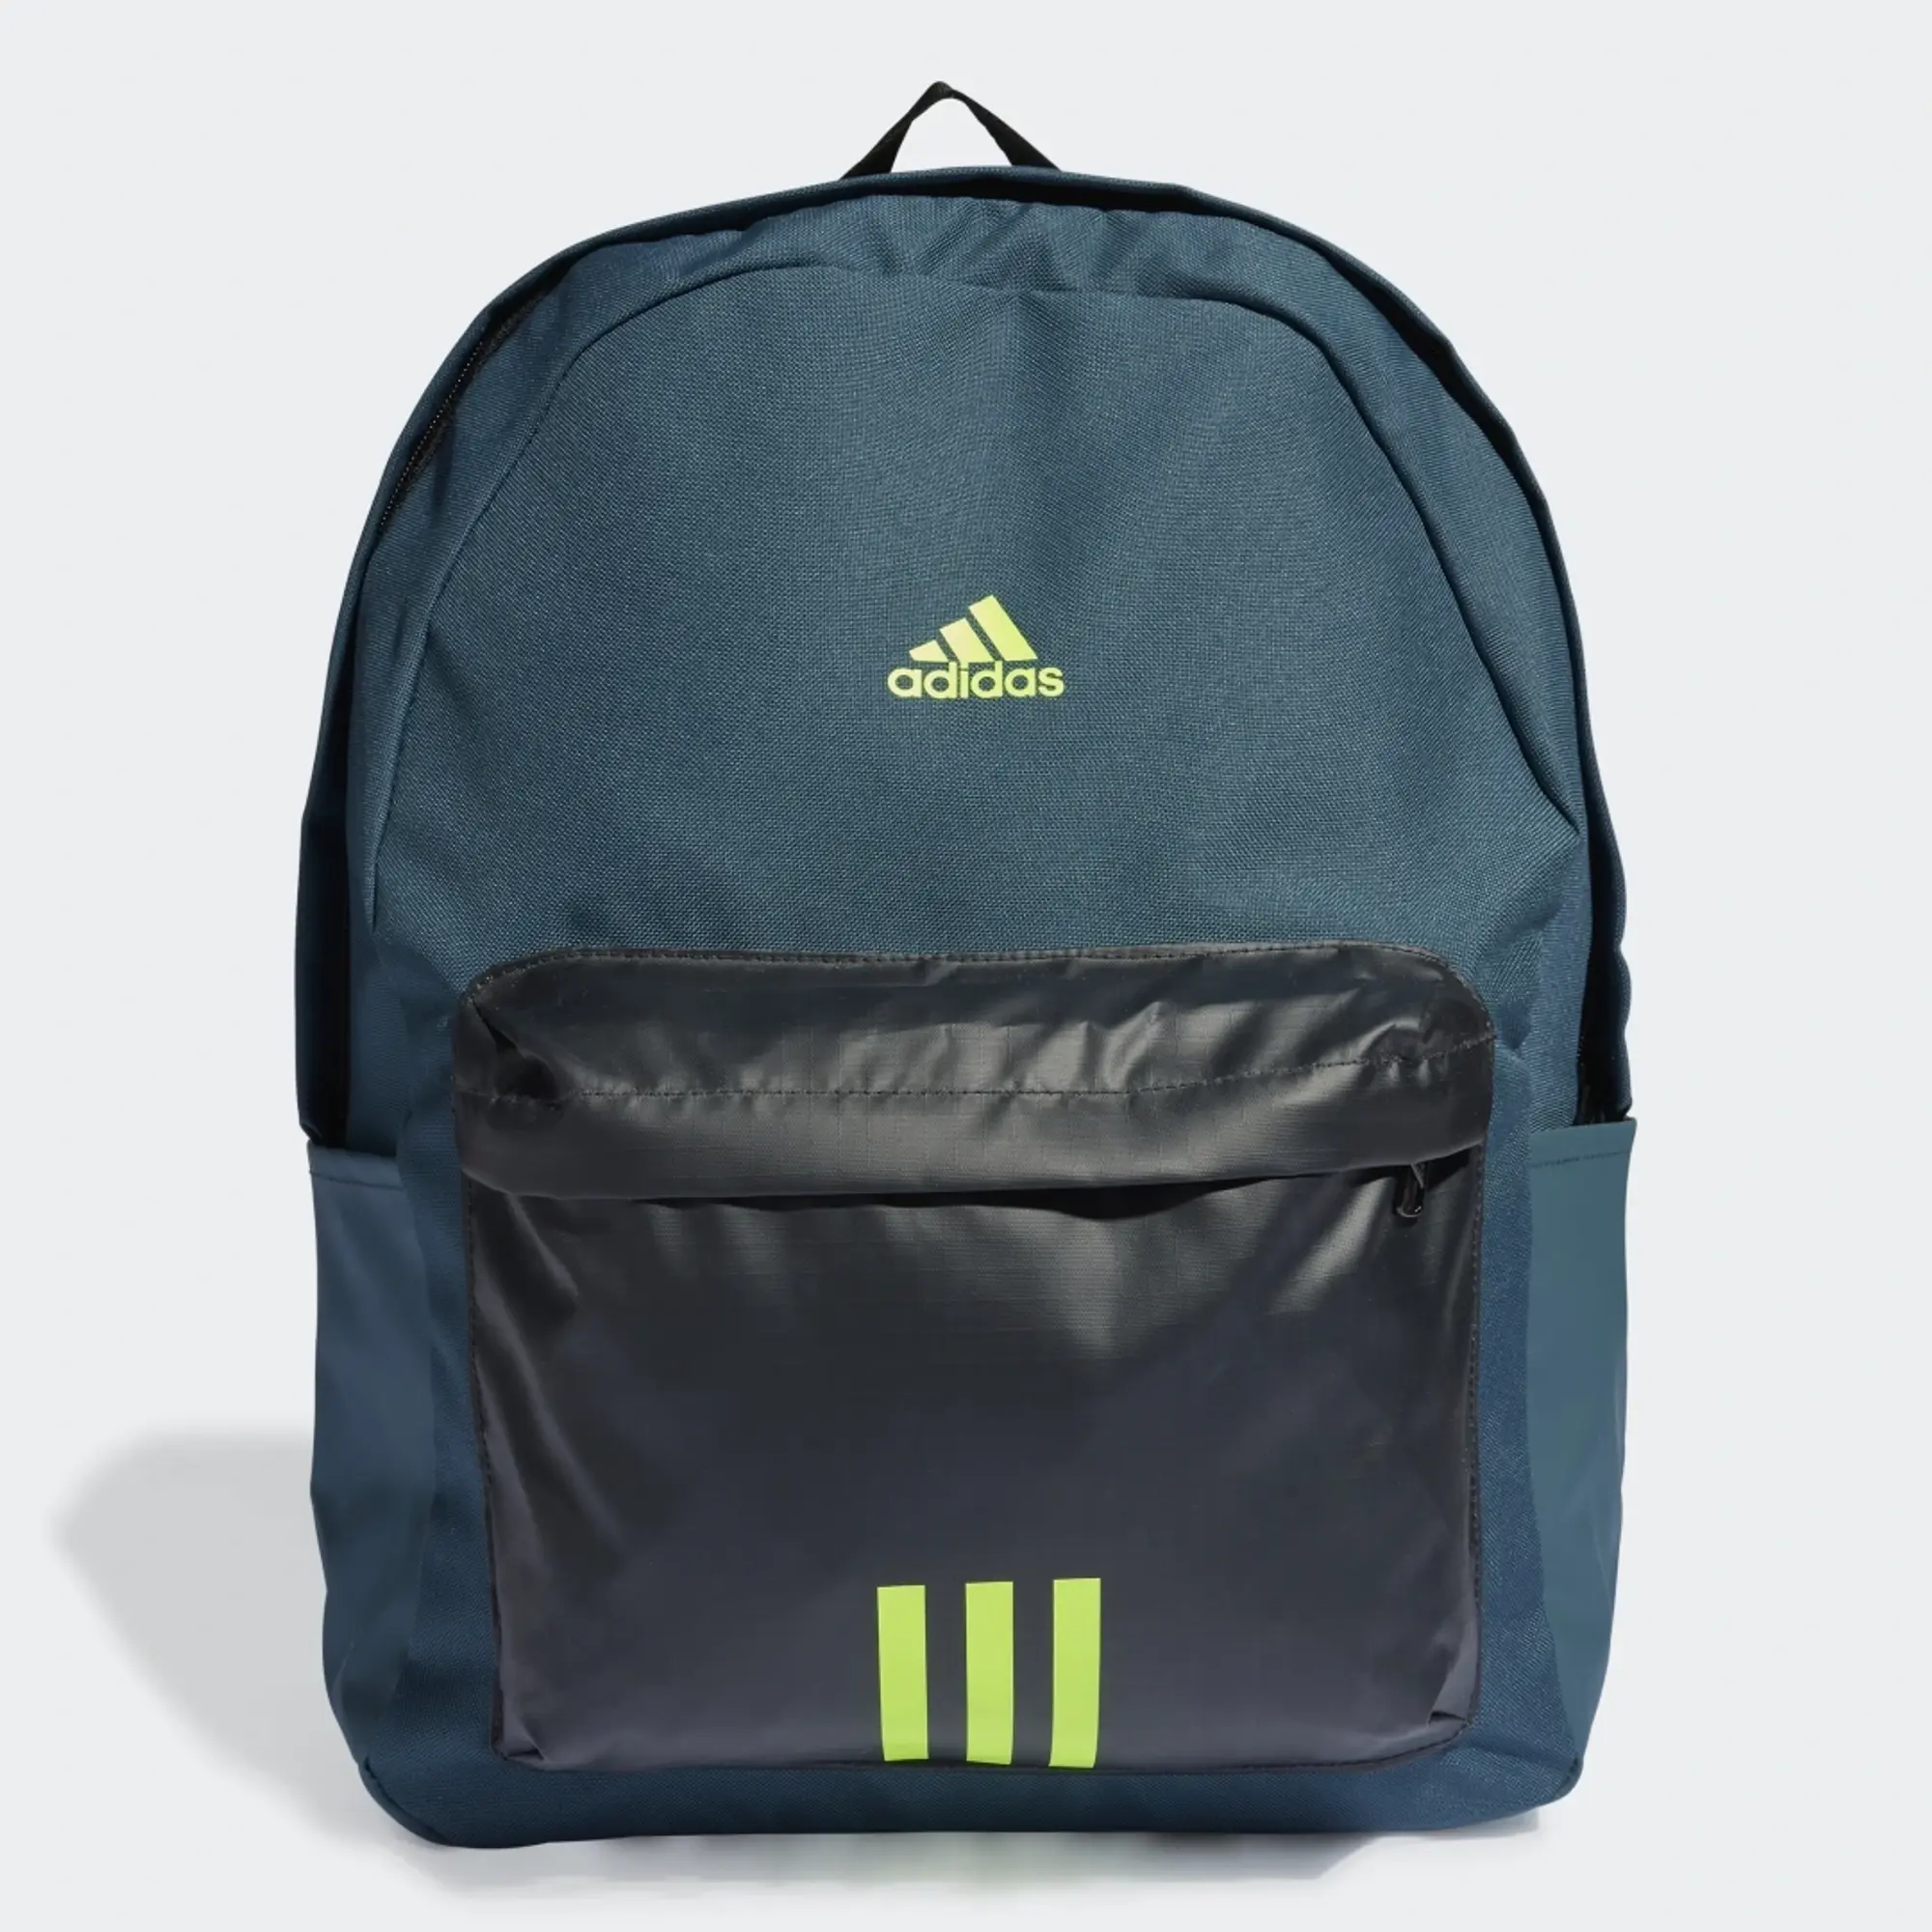 adidas Unisex Classic Badge of Sport 3 Stripes Backpack